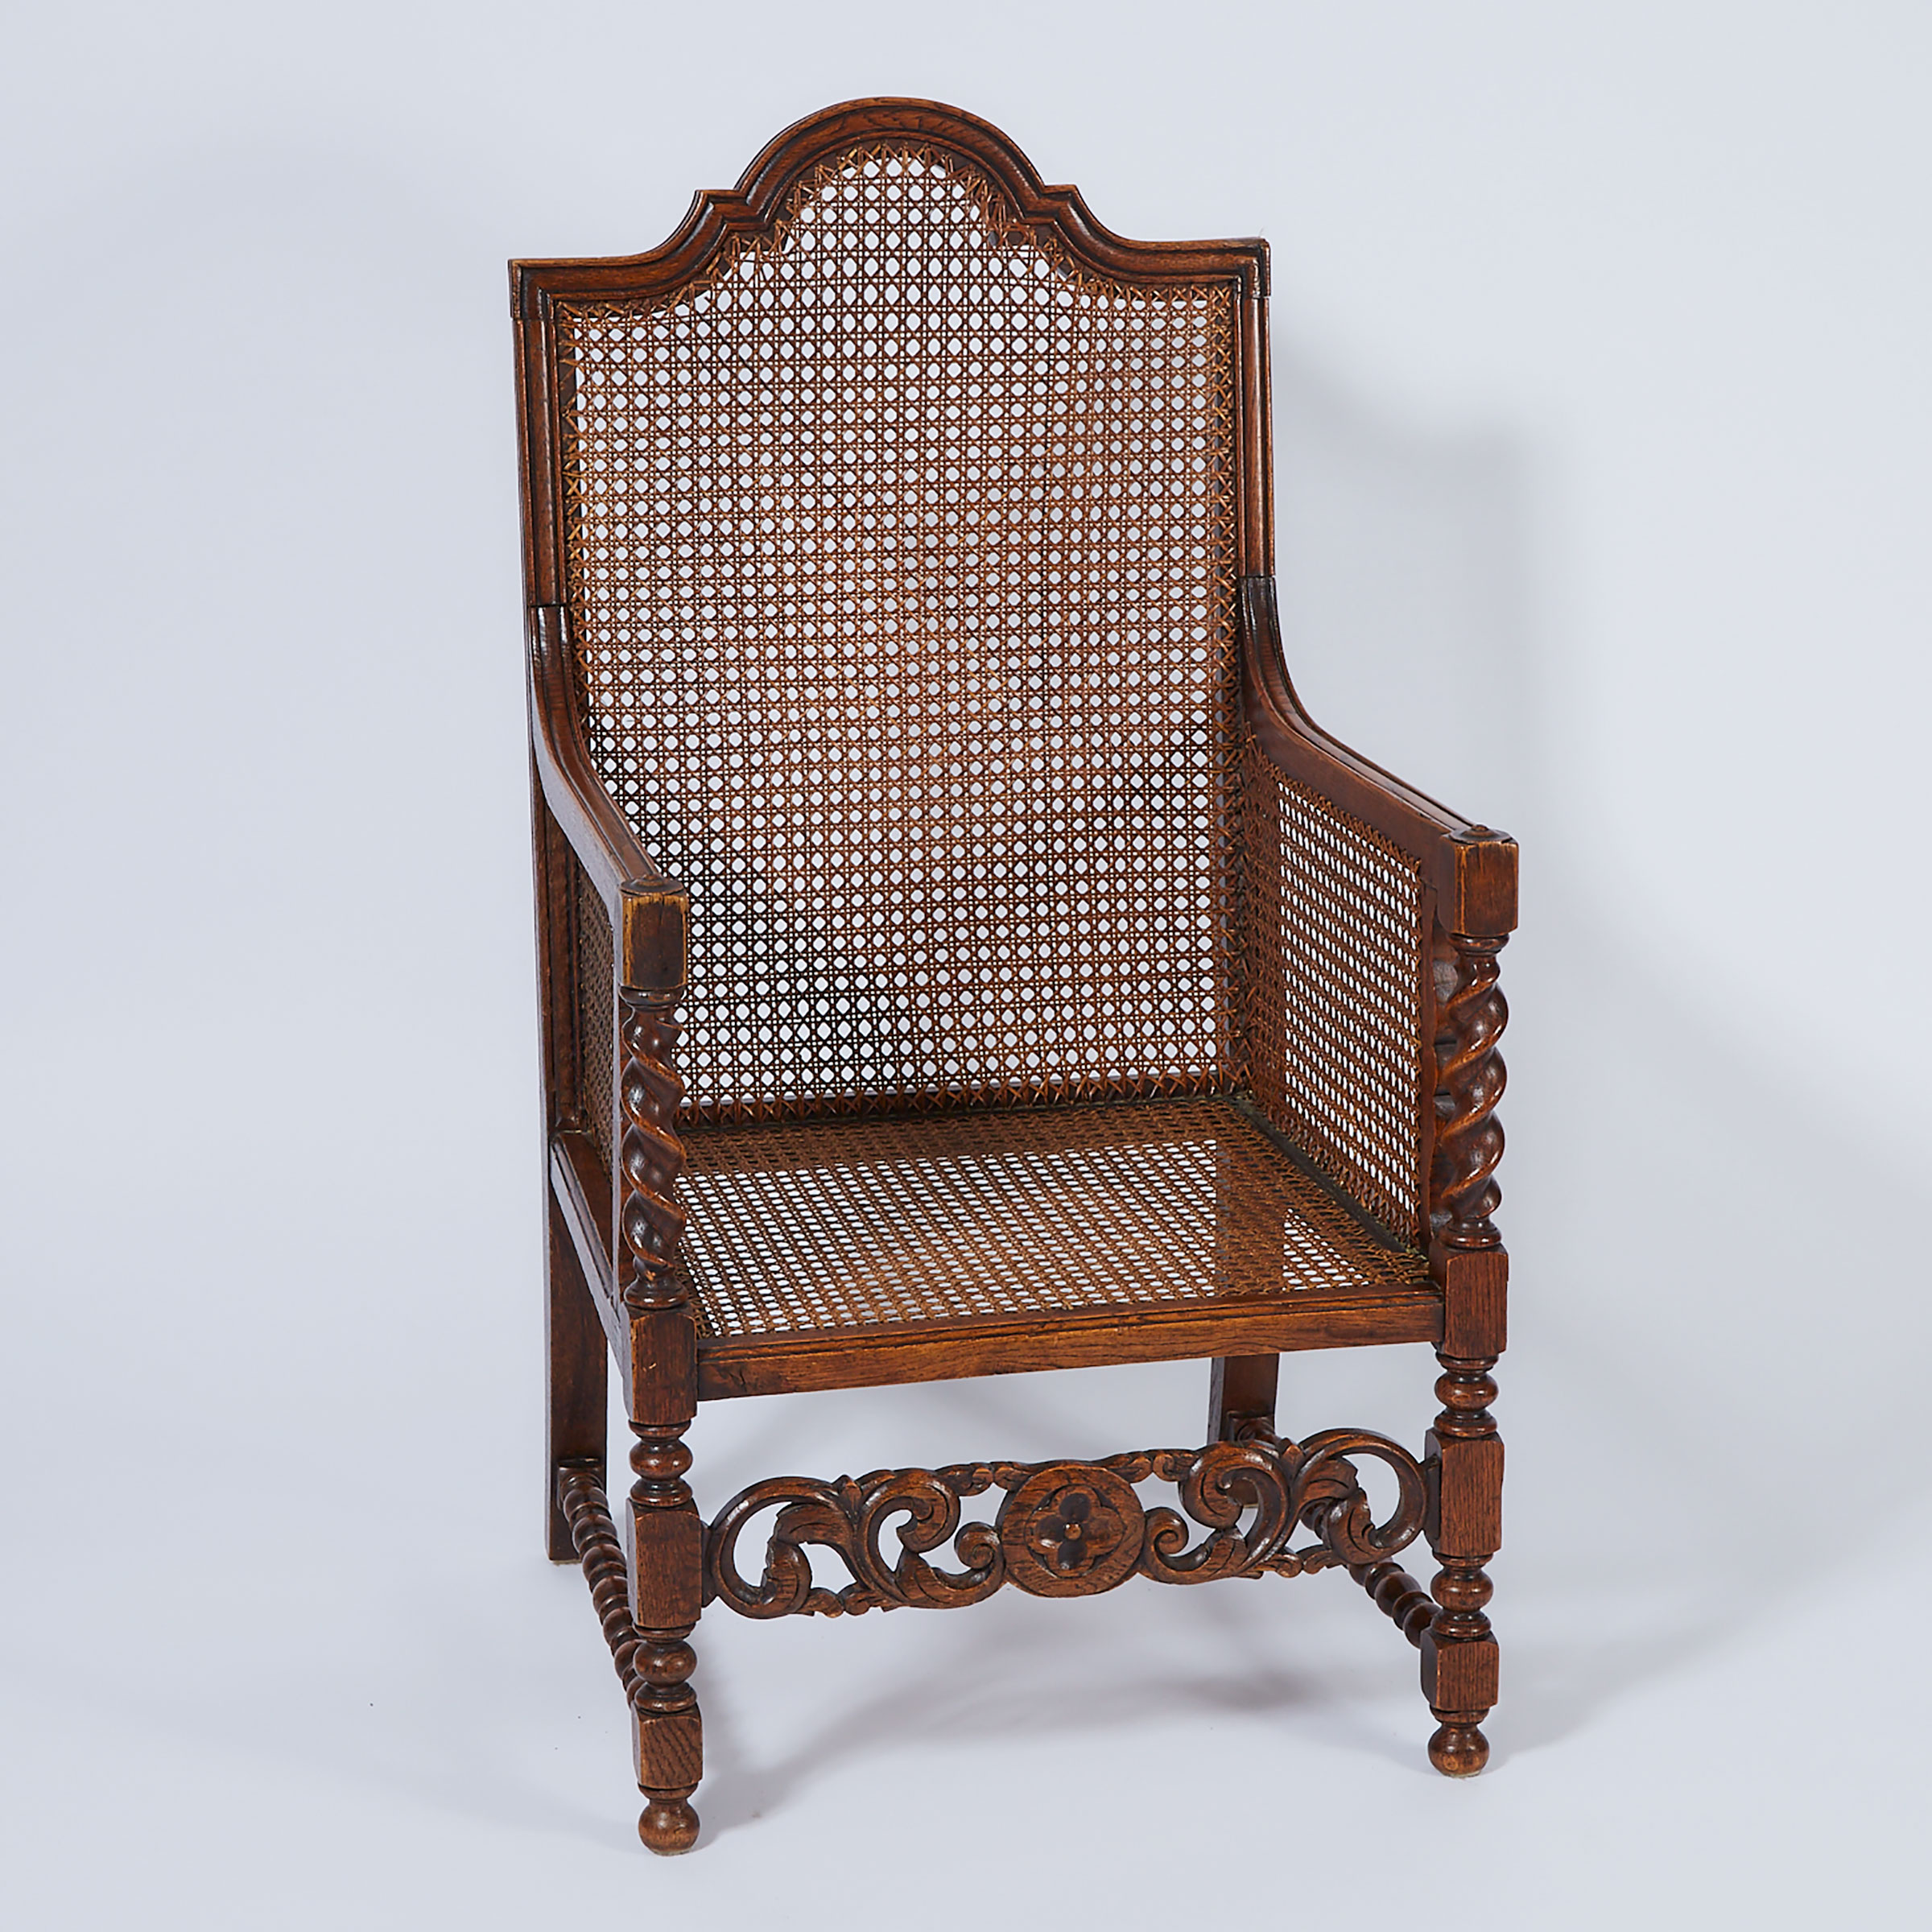 Victorian Renaissance Revival Caned Oak Library Chair, 19th century